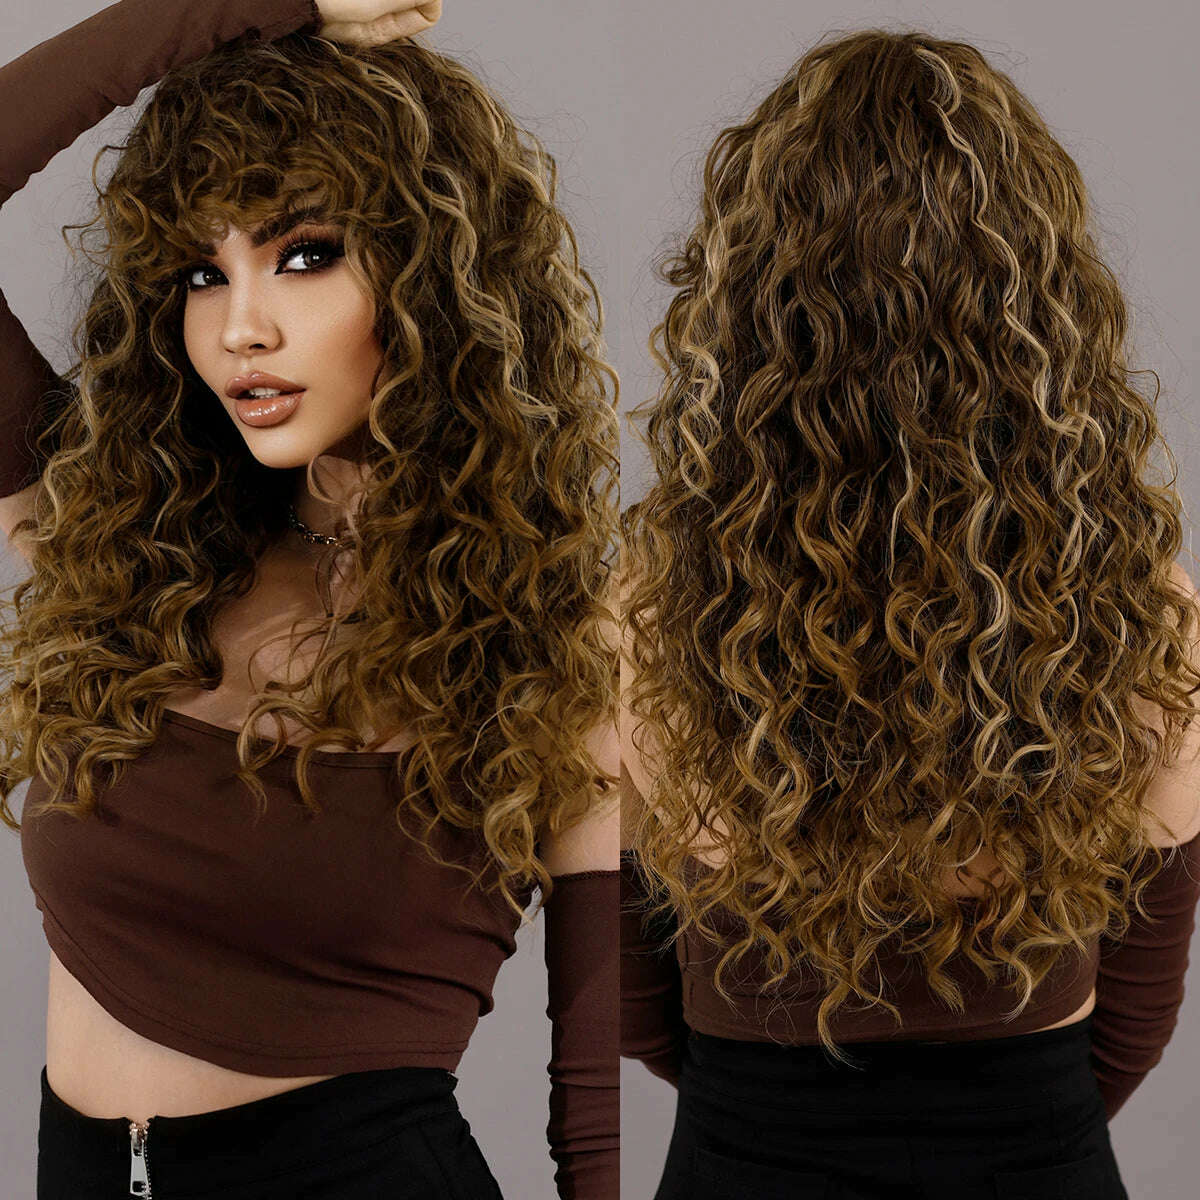 KIMLUD, NAMM Long Wavy Ombre Blonde Wigs for Women Cosplay Daily Party Synthetic Light Orange Hair Wig Lolita Heat Resistant Fiber, MW9054-3 / Follow us - 2USD, KIMLUD Womens Clothes